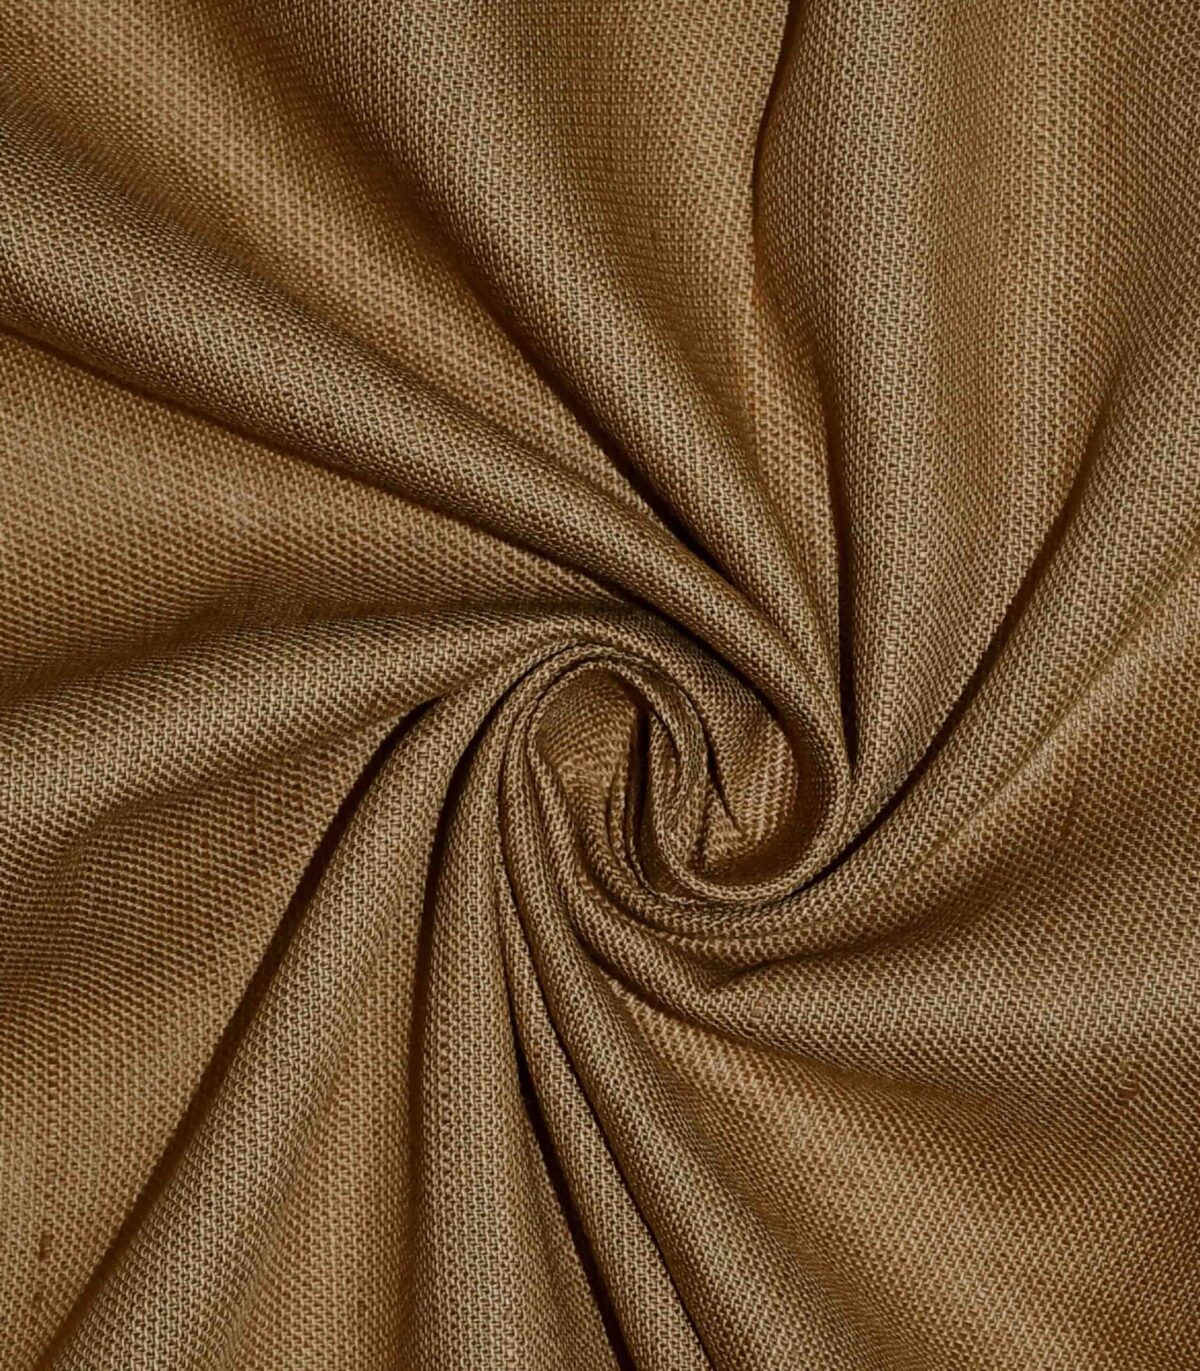 Cotton Linen Rust Color Dyed Fabric